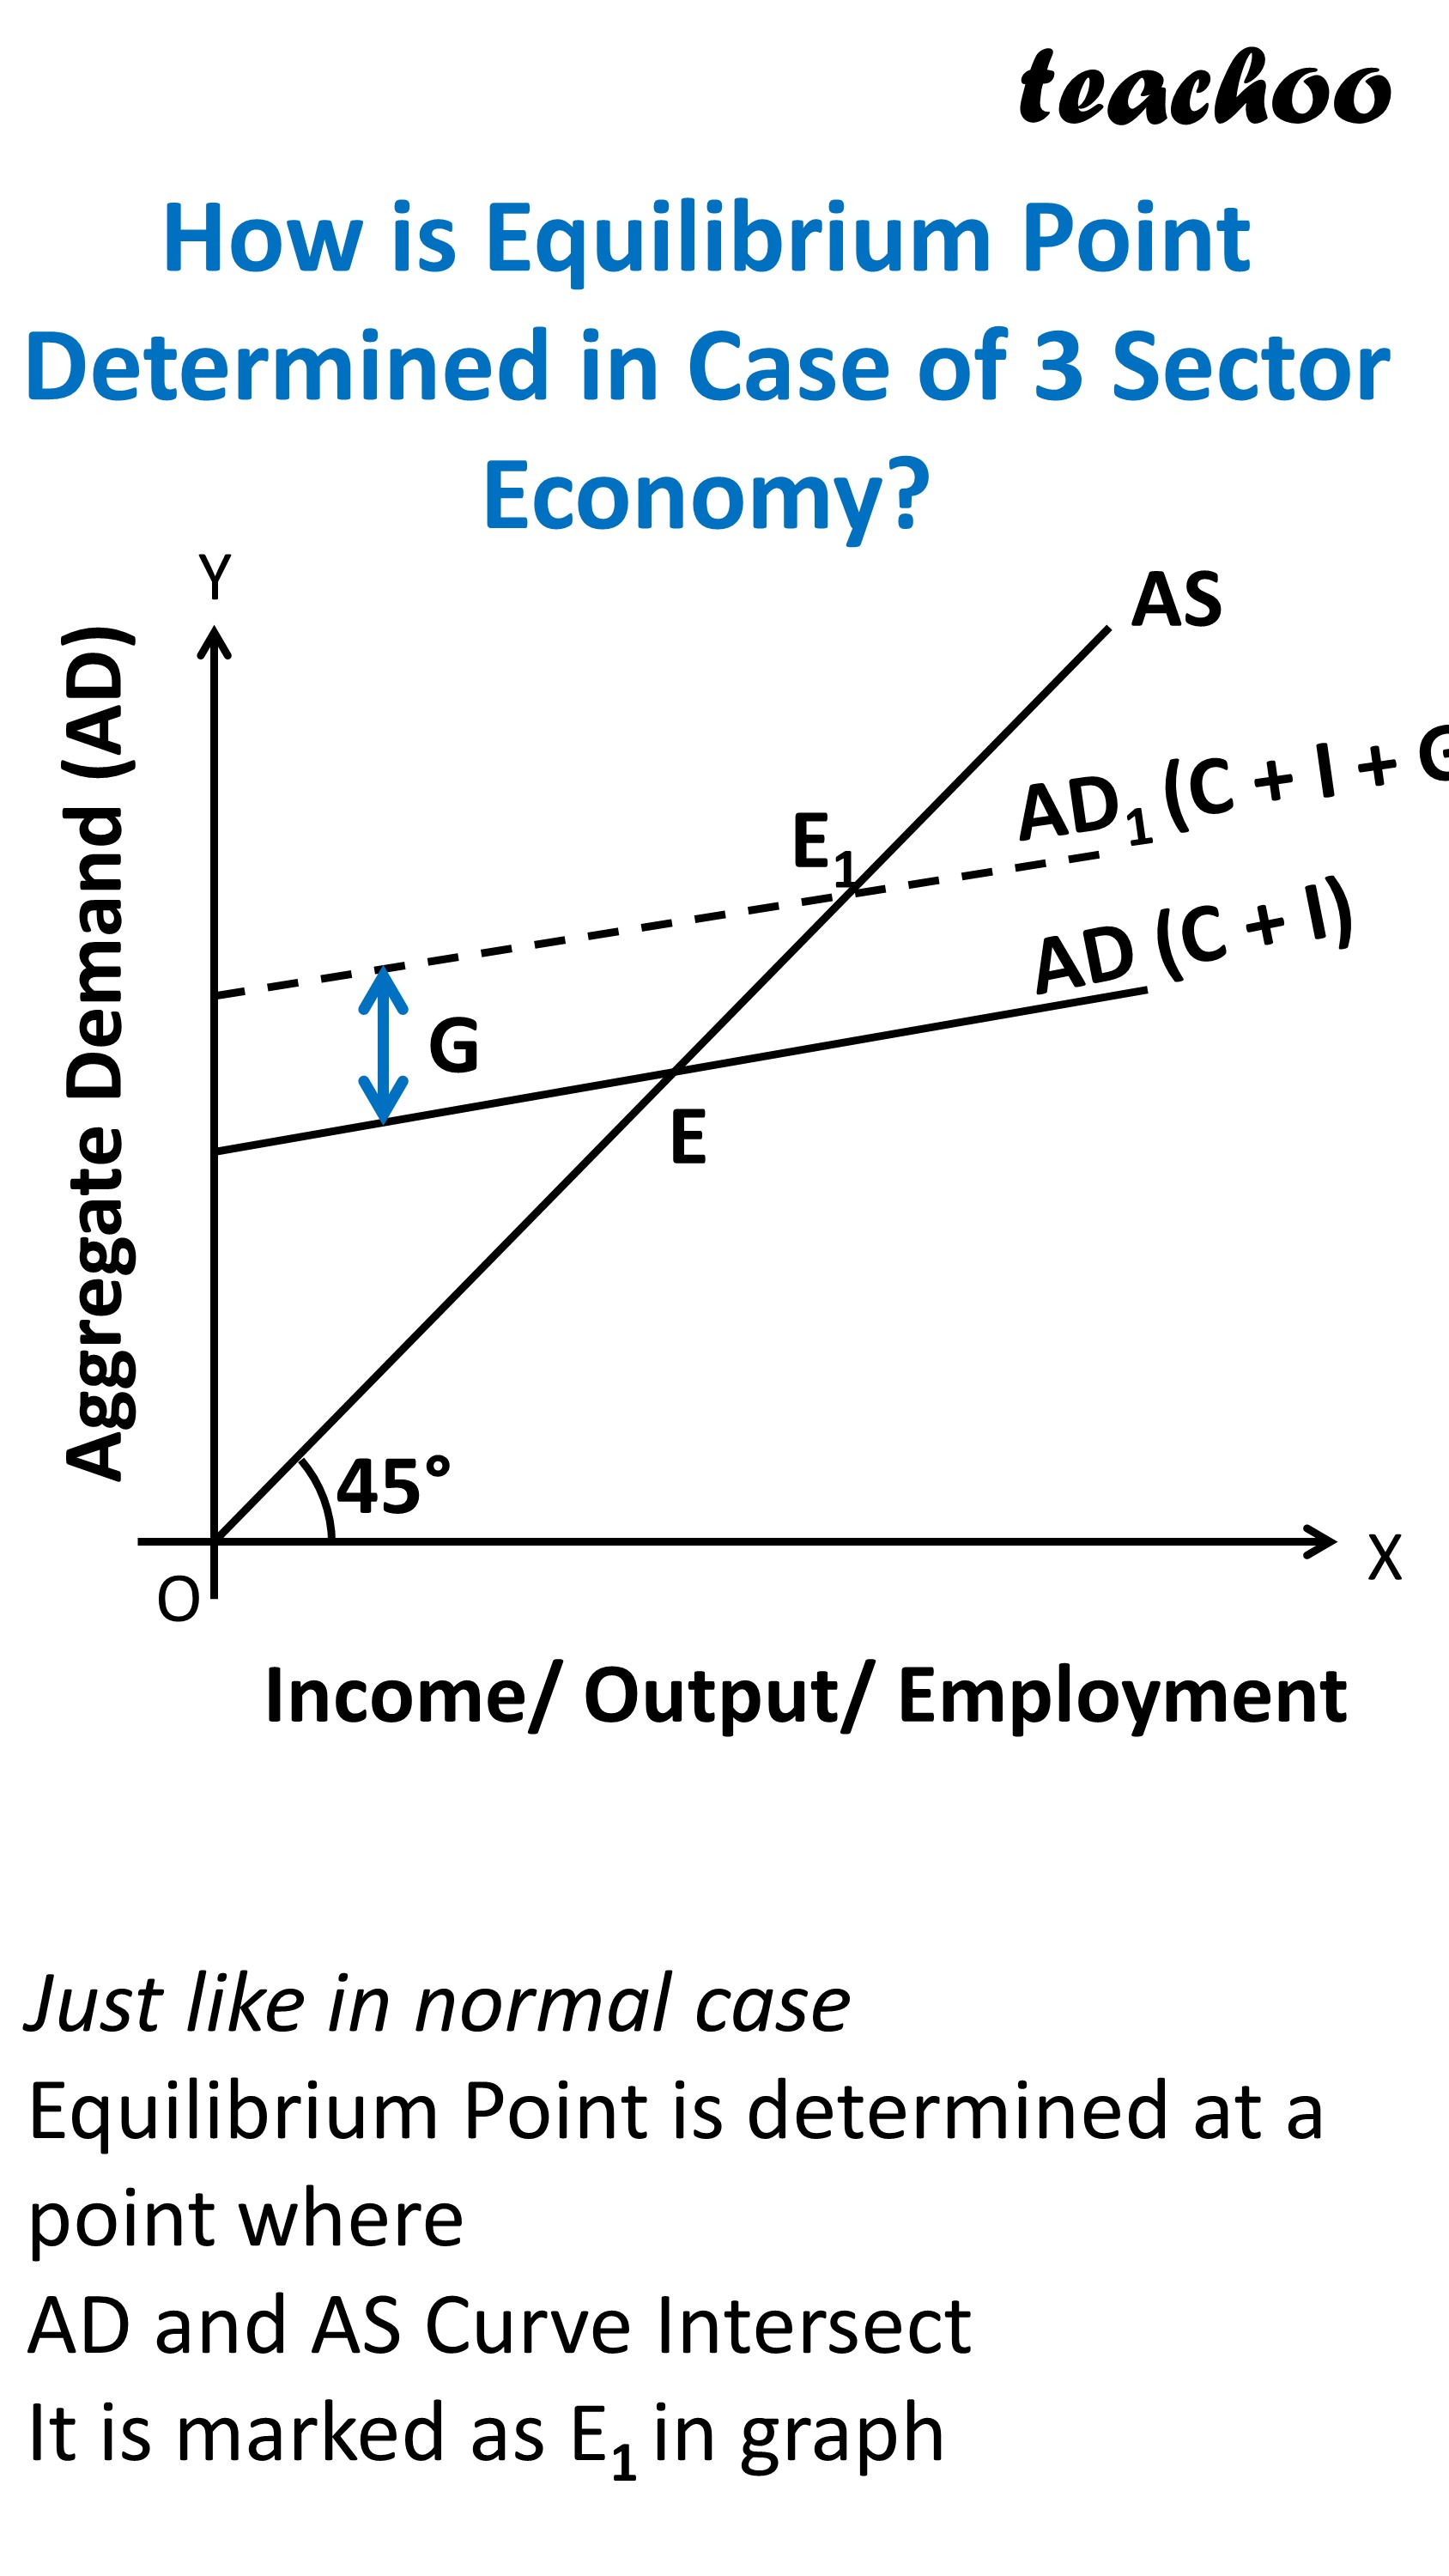 How is Equilibrium Point Determined in Case of 3 Sector Economy - Teachoo.JPG